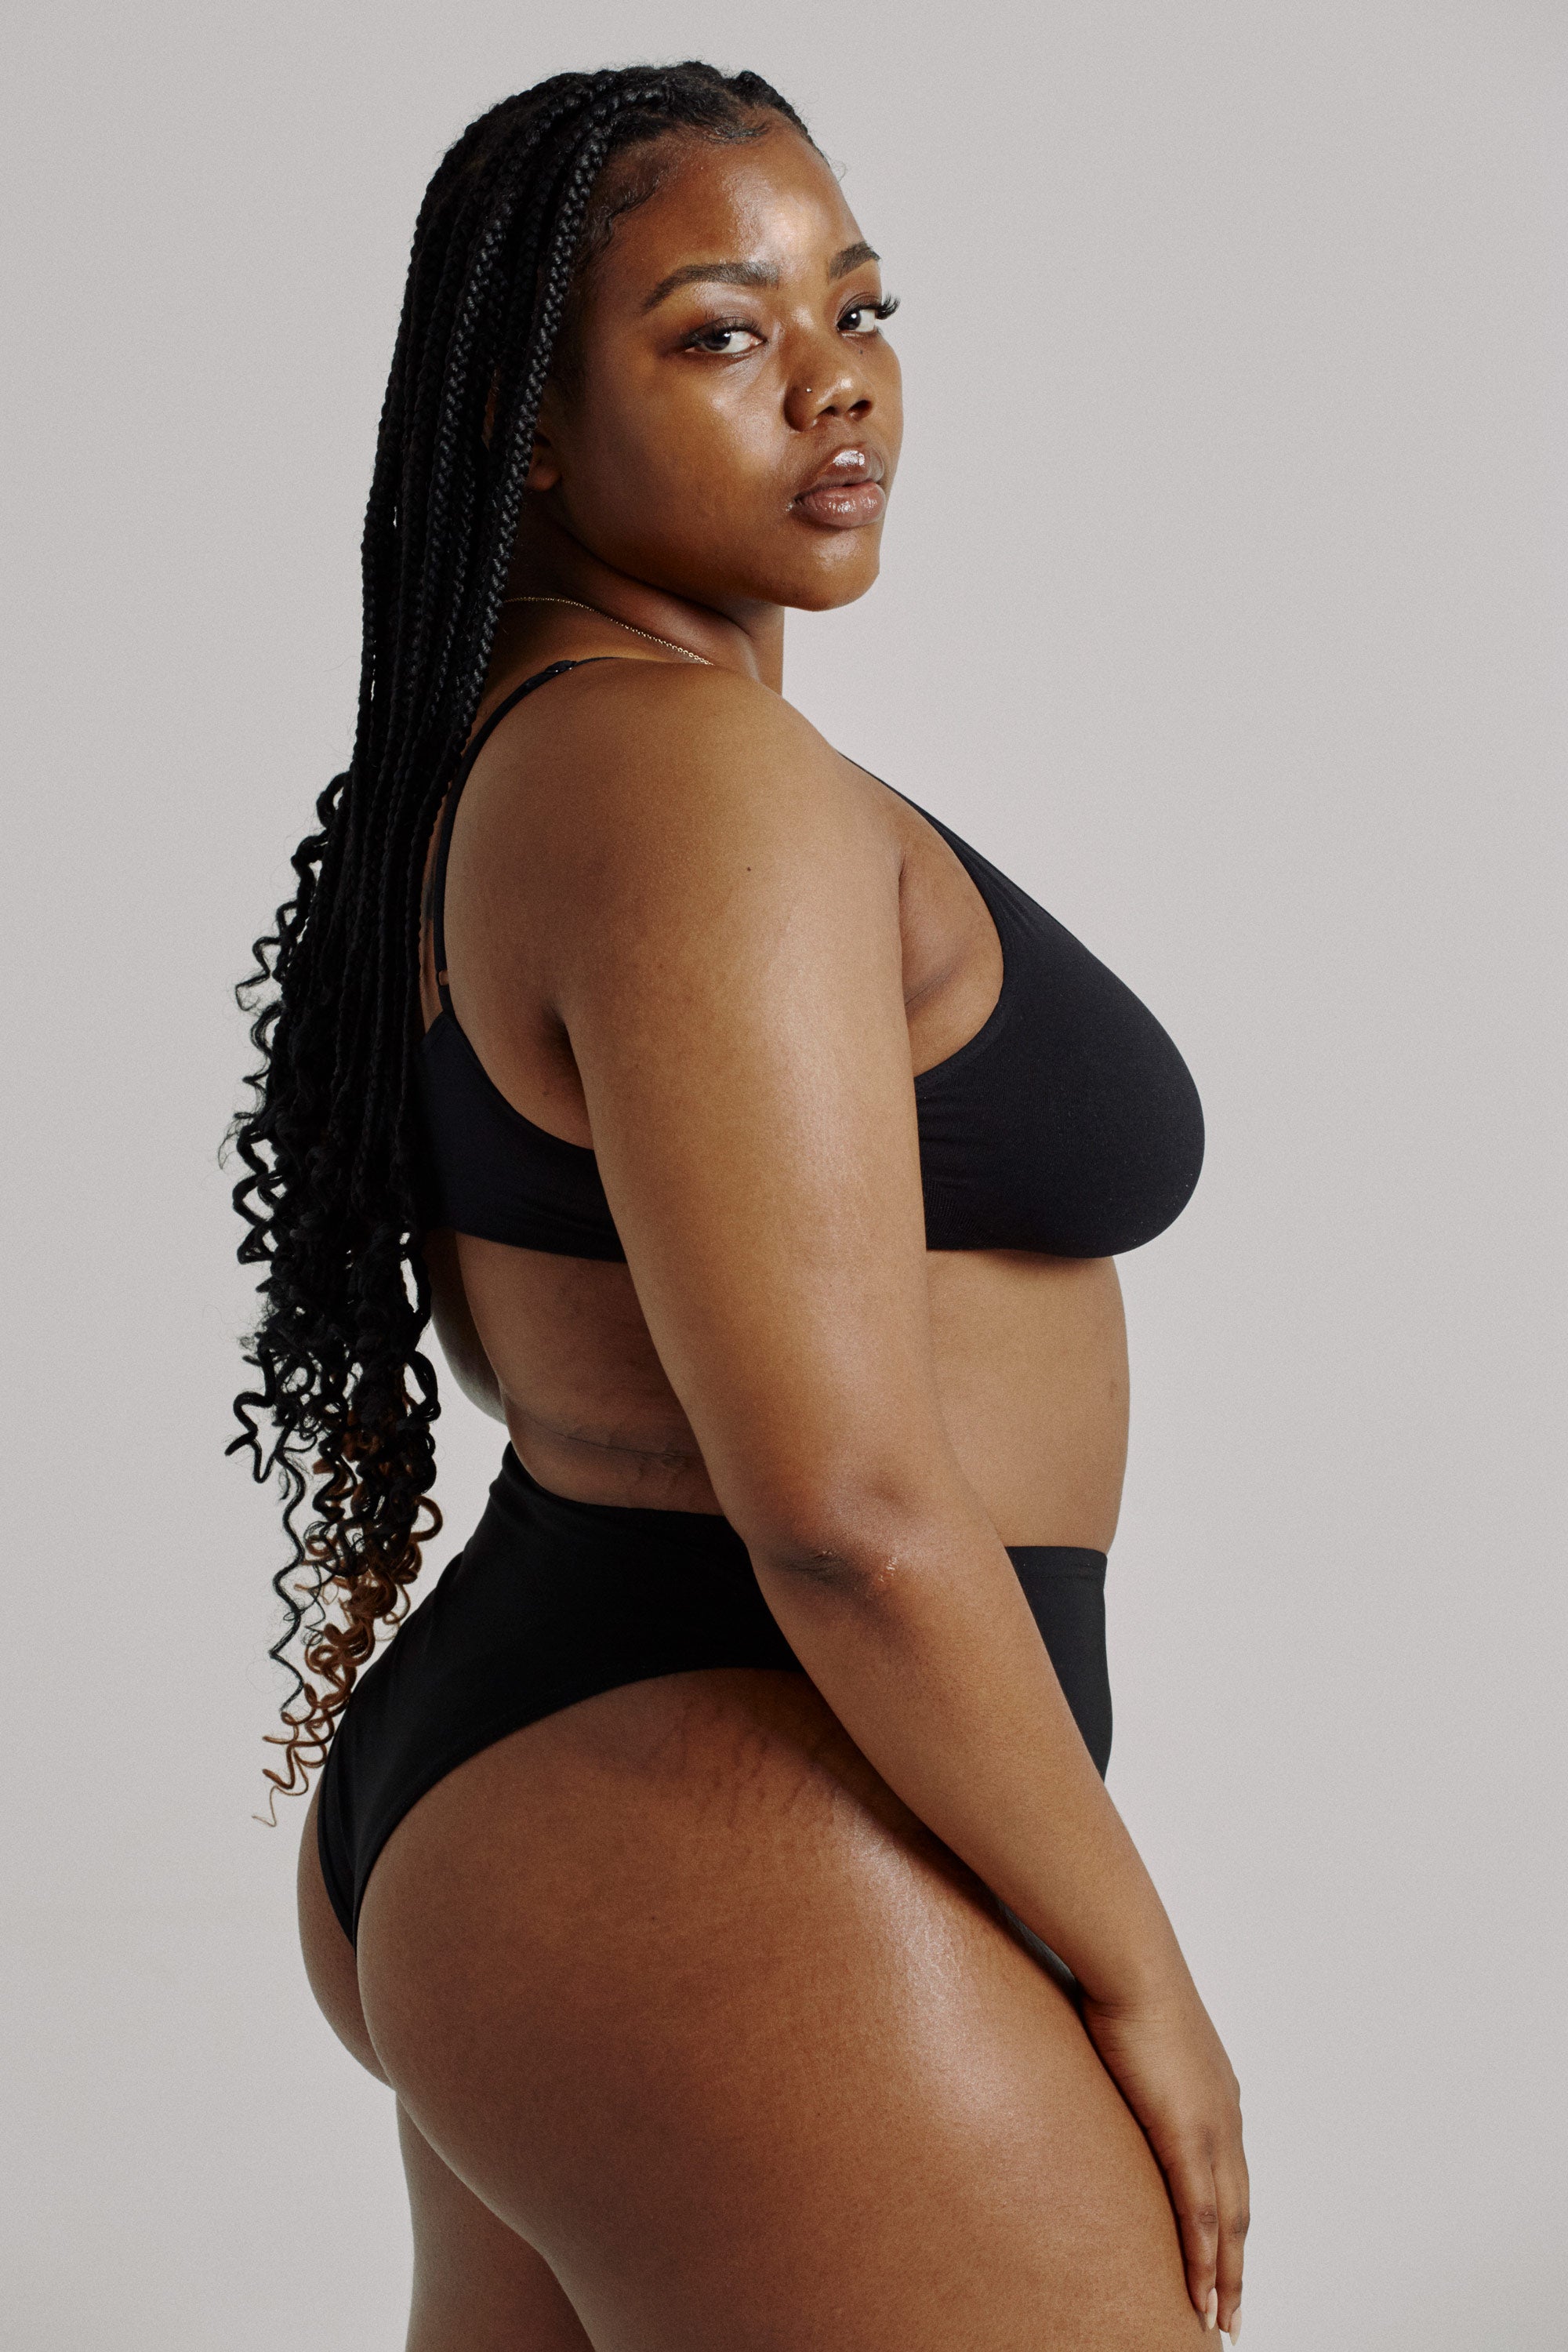 5 Plus-Size Models On Self-Love & Tokenism